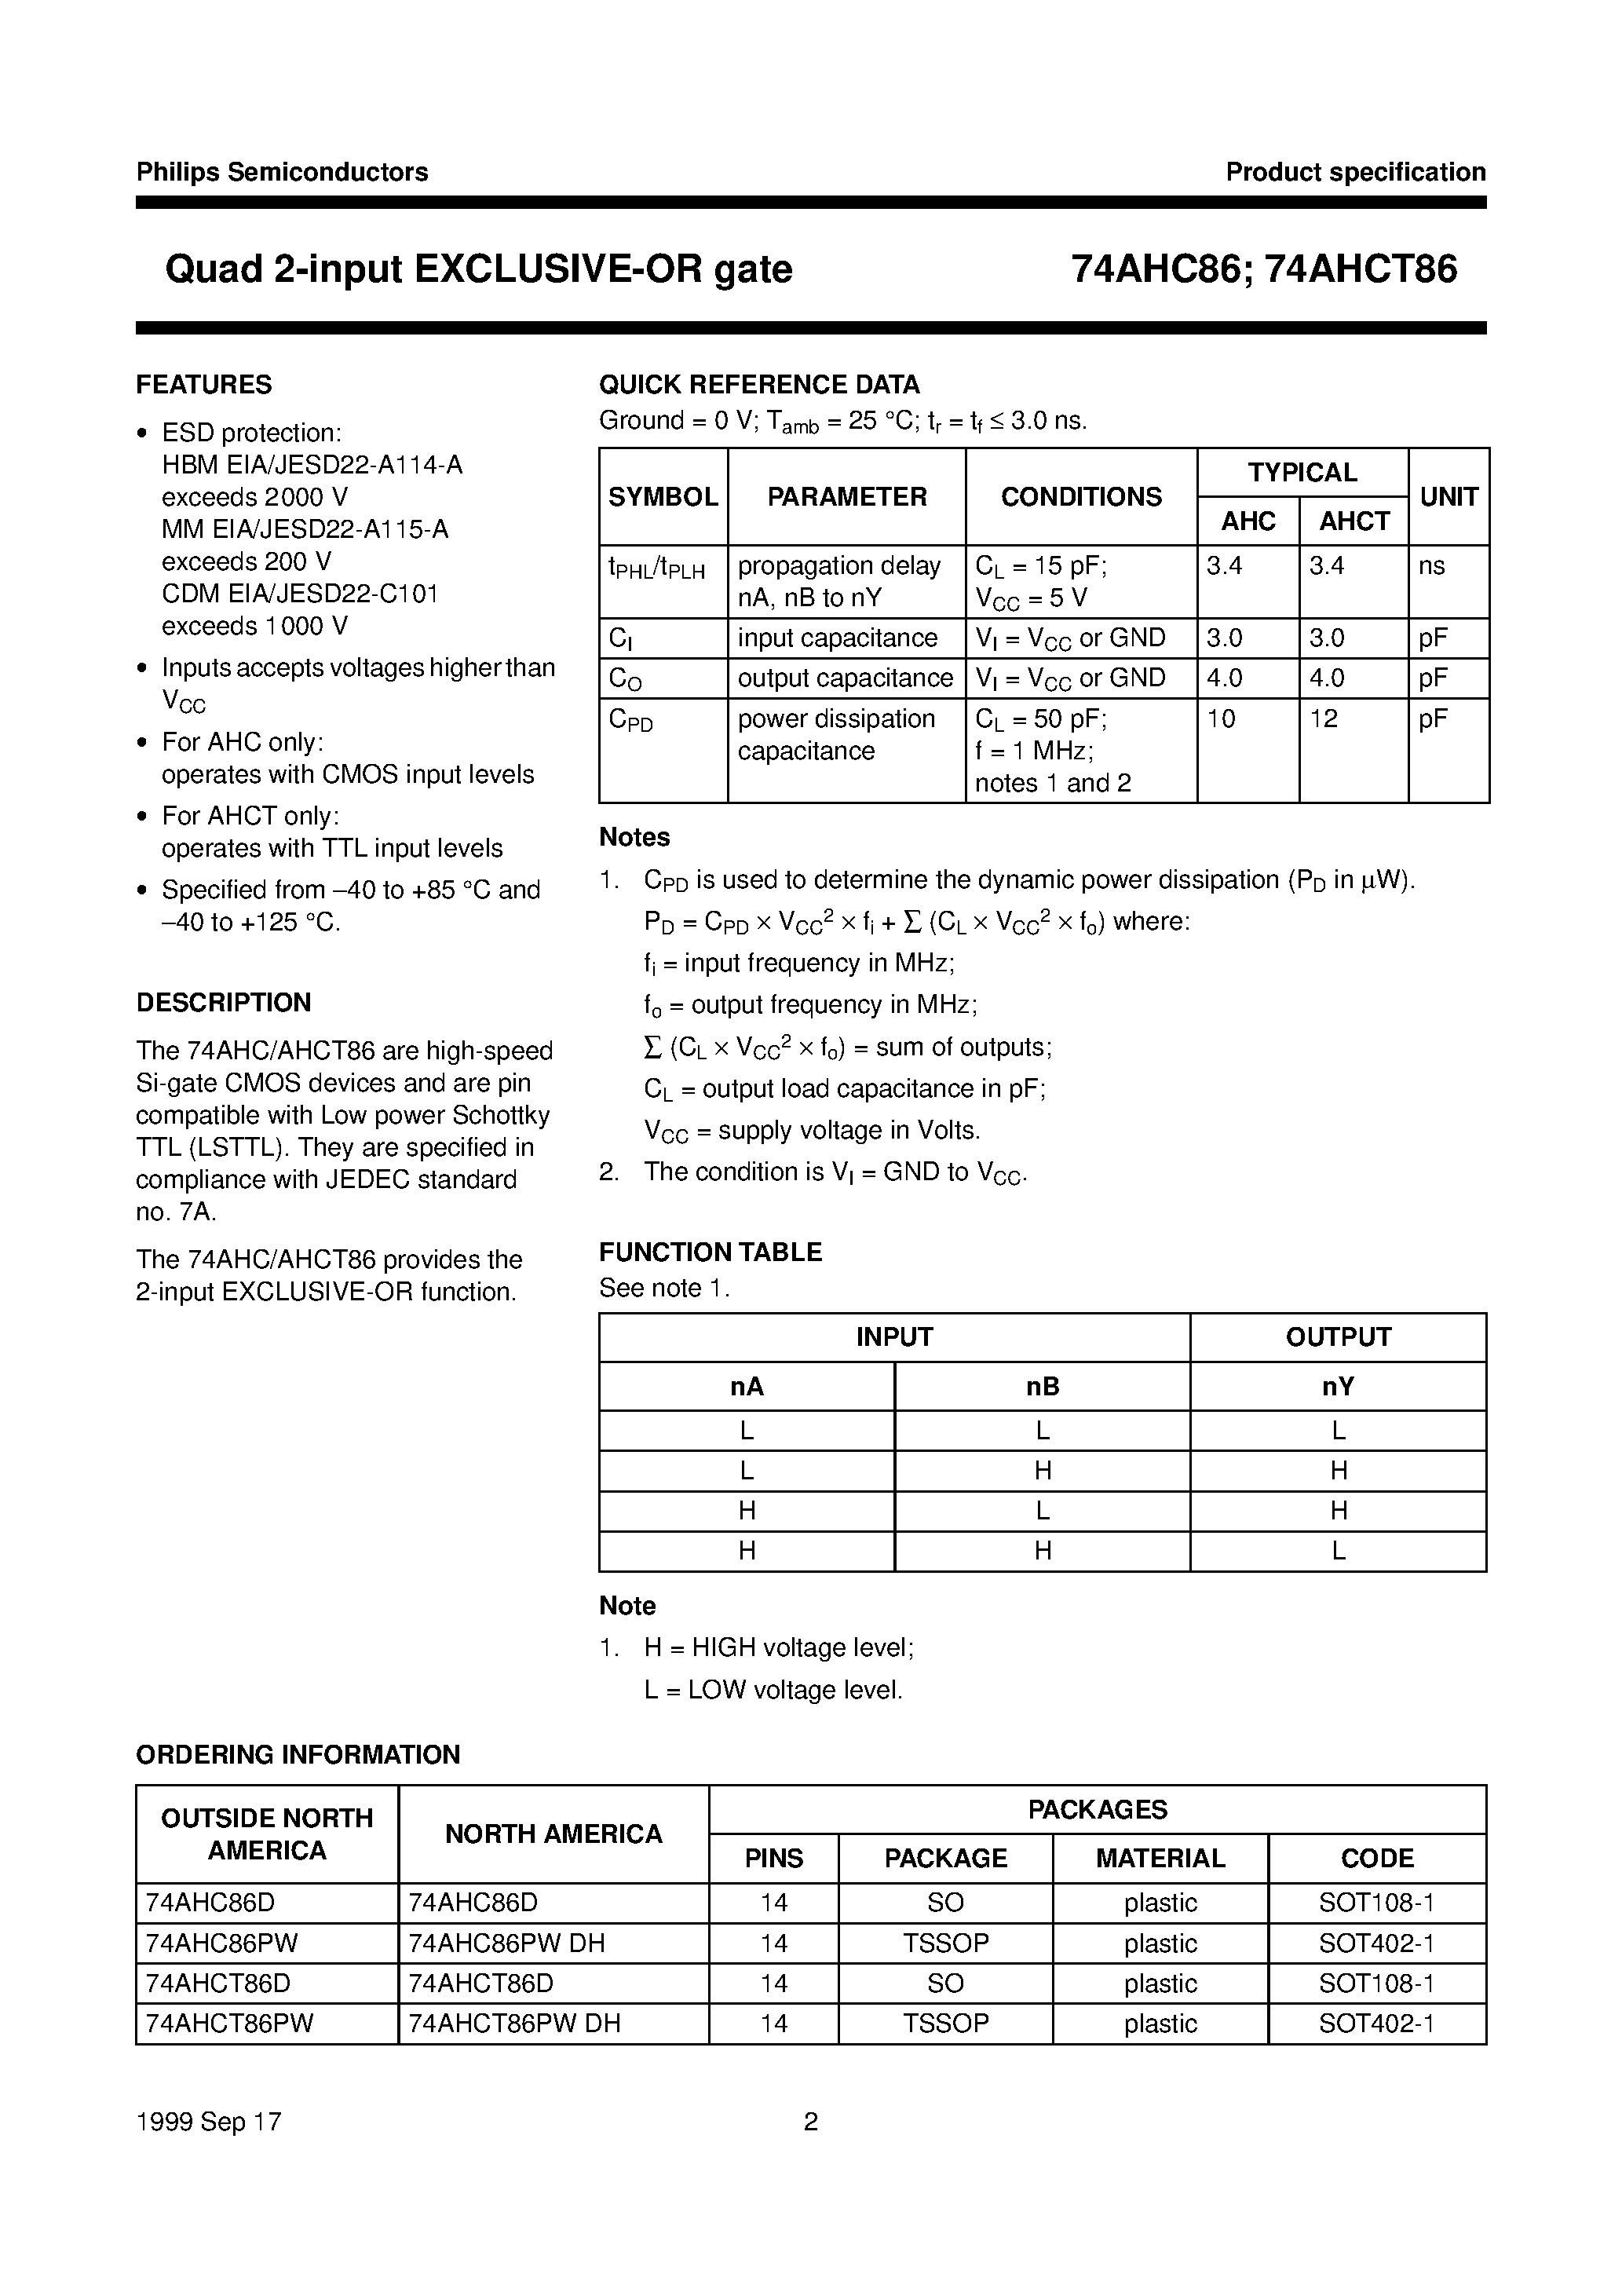 Datasheet 74AHCT86 - Quad 2-input EXCLUSIVE-OR gate page 2